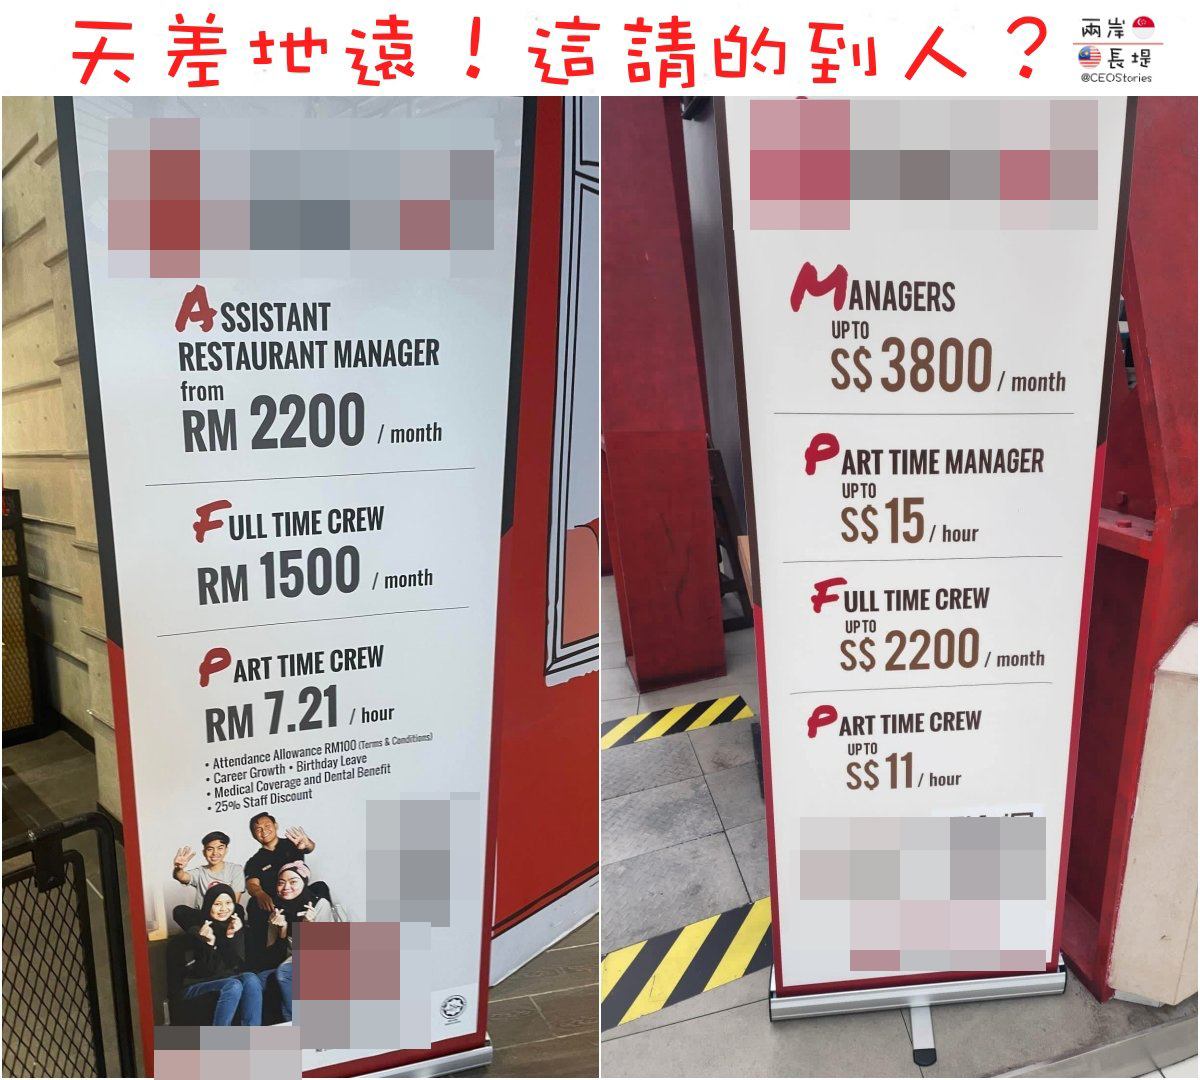 A job vacancy ad for a popular fast food restaurant shows a discrepancy of salaries for similar positions in Malaysia and Singapore. Image credit: 新加坡华人网